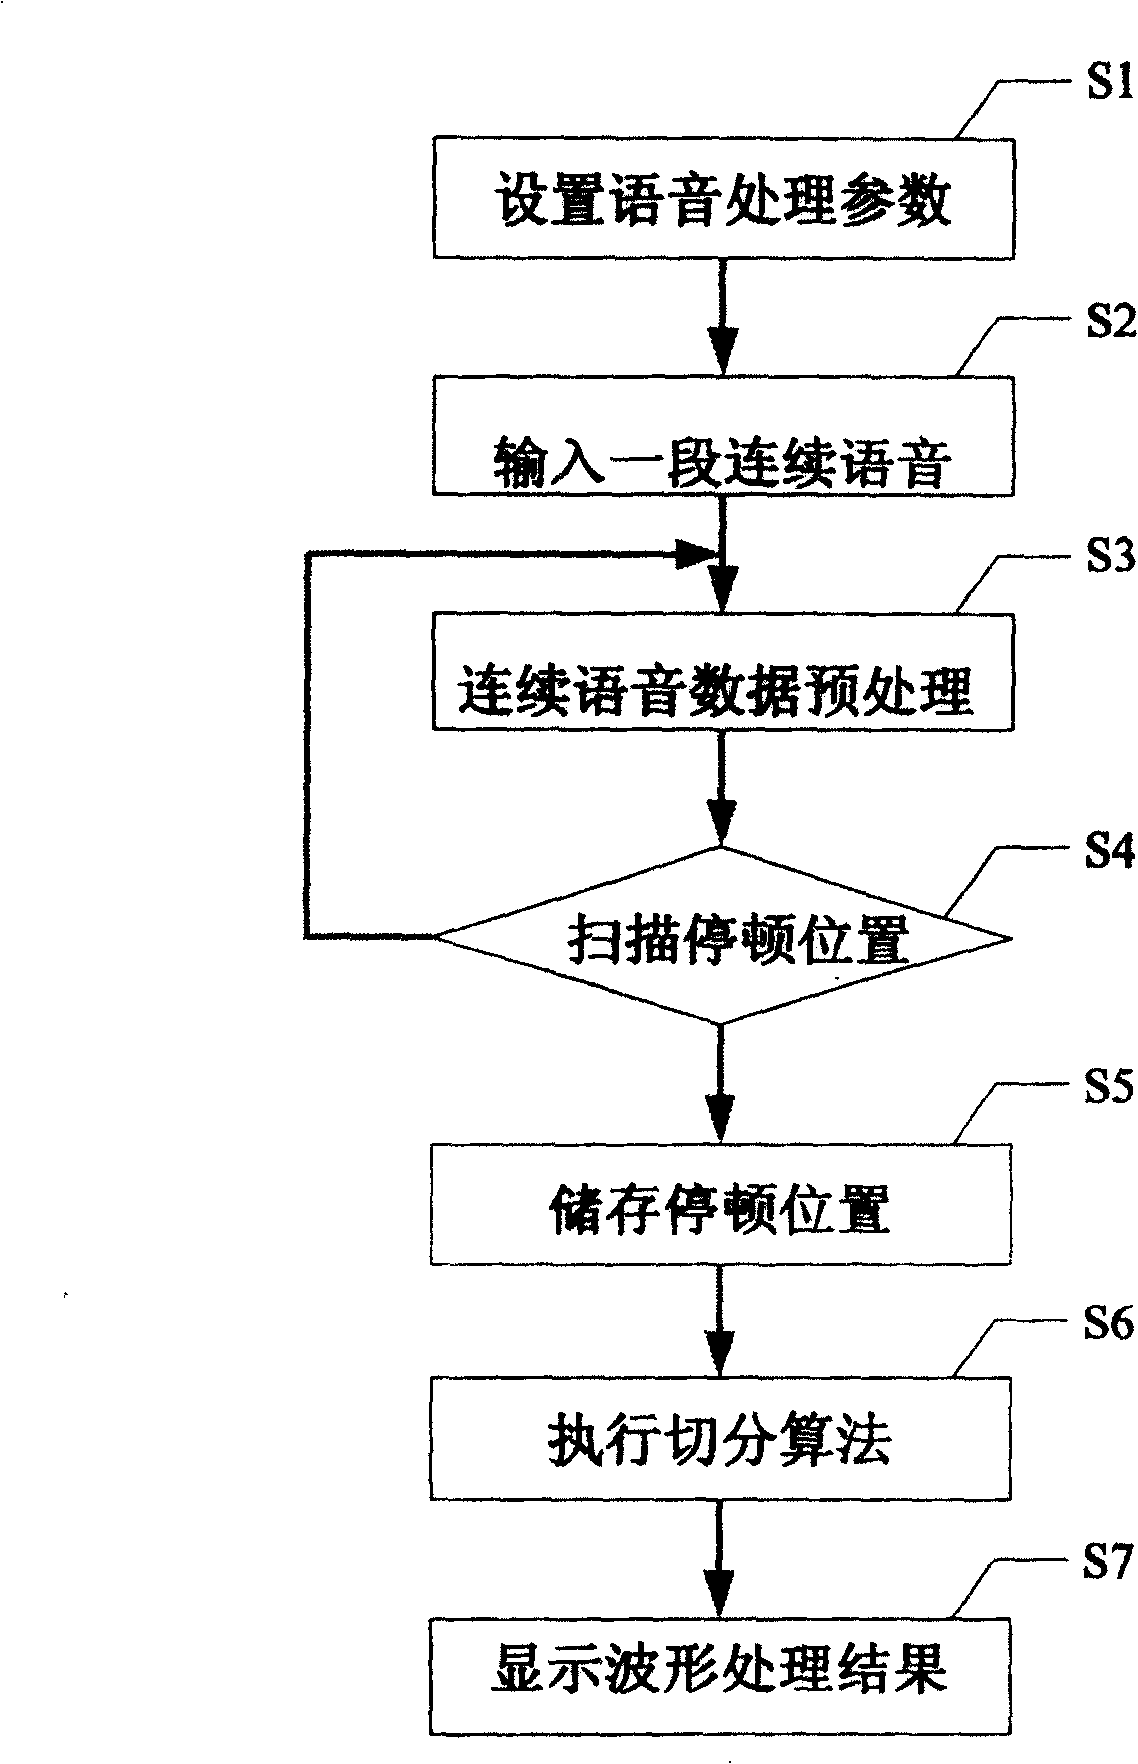 Speech waveform processing system and method